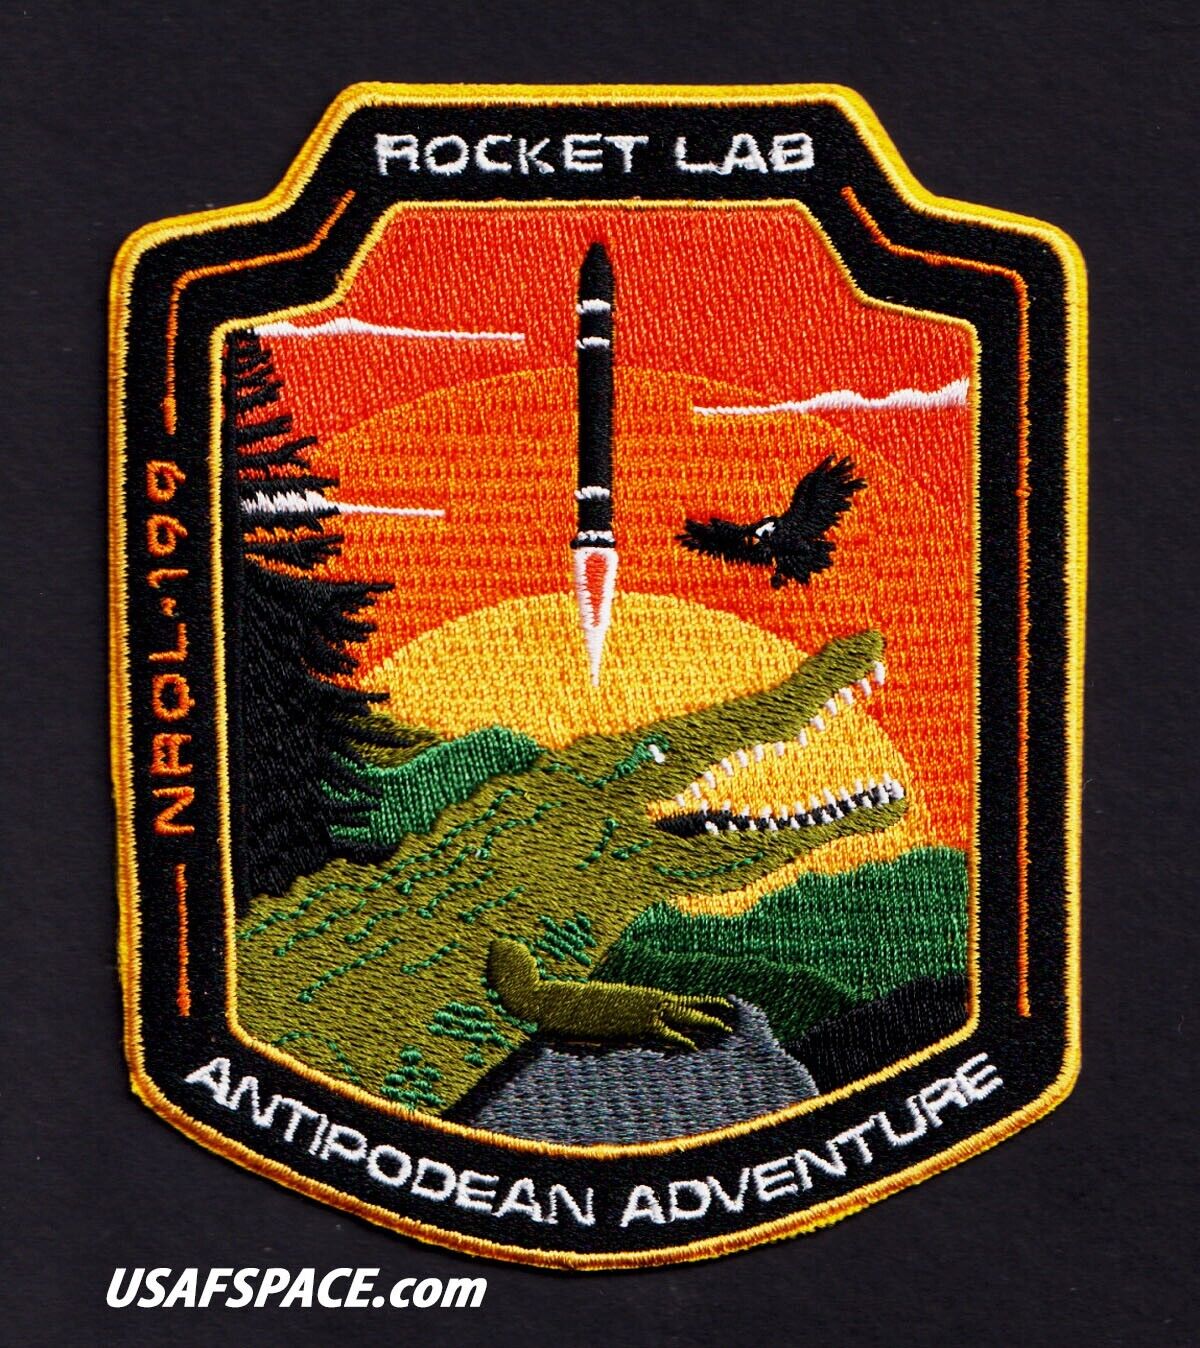 ROCKET LAB 29 -NROL-199- ELECTRON -NRO Classified SATELLITE Mission SPACE PATCH